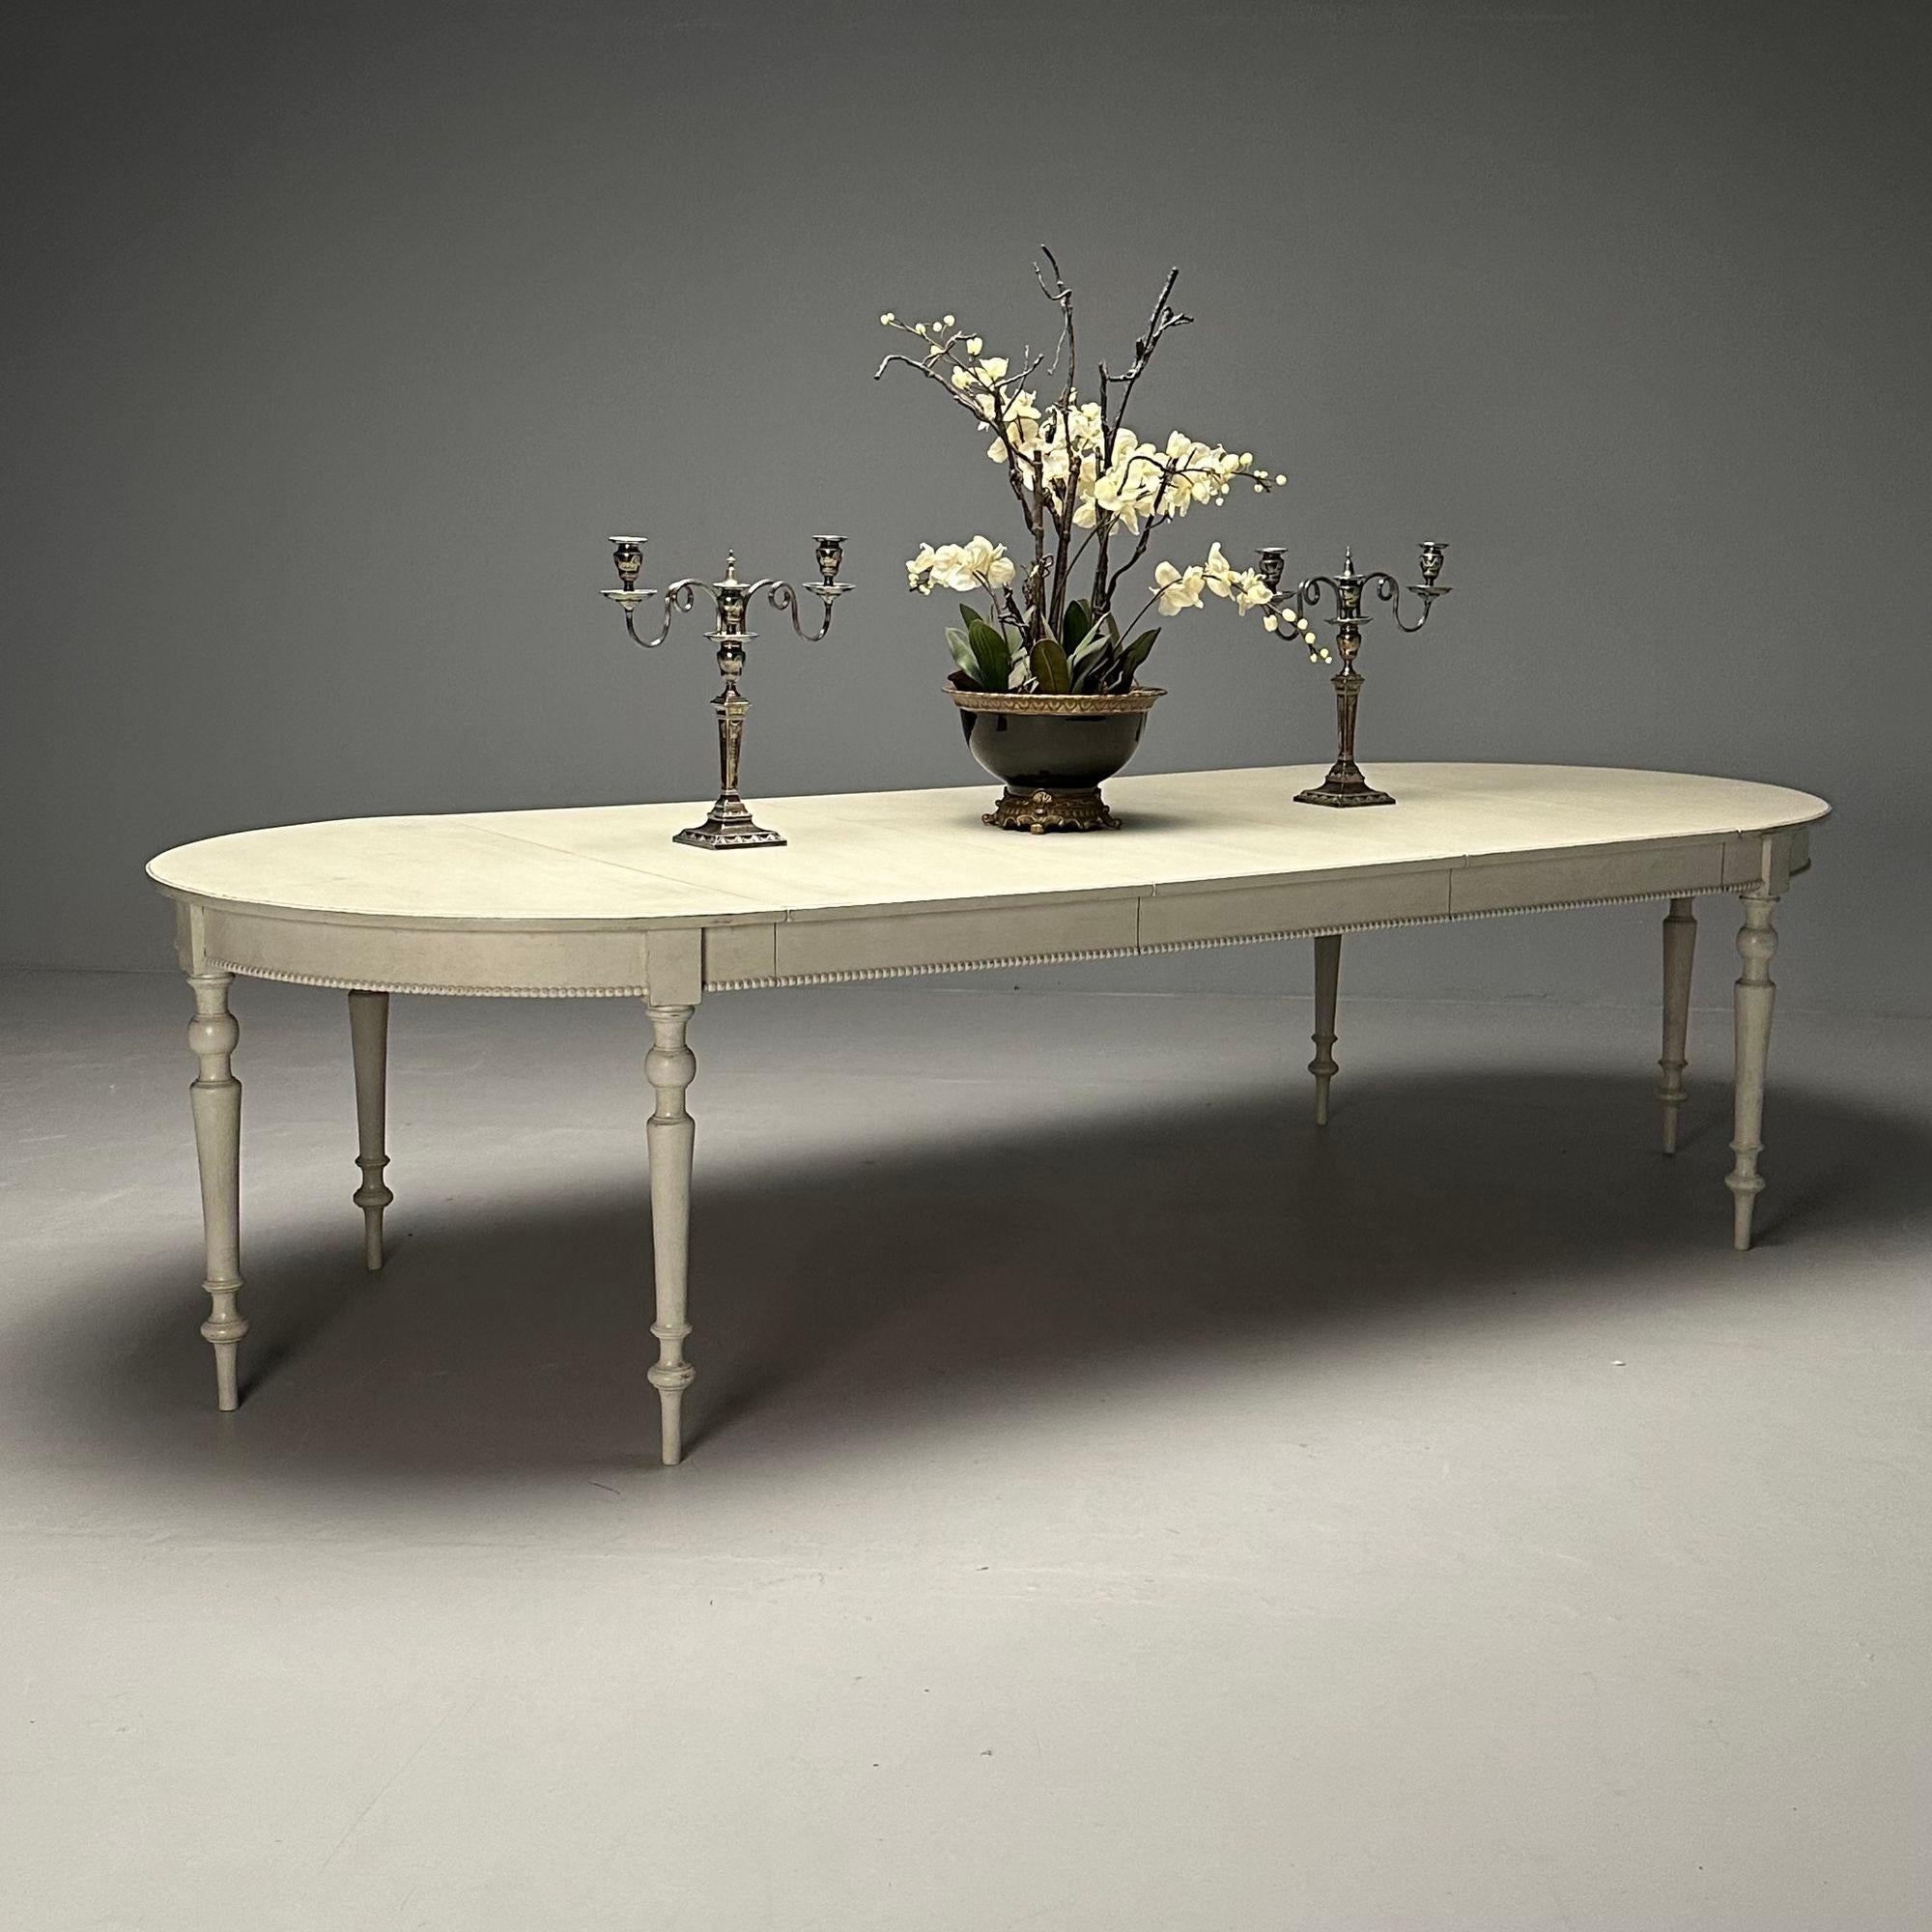 Gustavian, Large Swedish Dining or Conference Table, Gray Paint Distressed, Sweden, 1970s

Large six legged Gustavian dining table designed and produced in Sweden circa 1970s. Having a gray paint distressed finish. This table has a beaded apron and